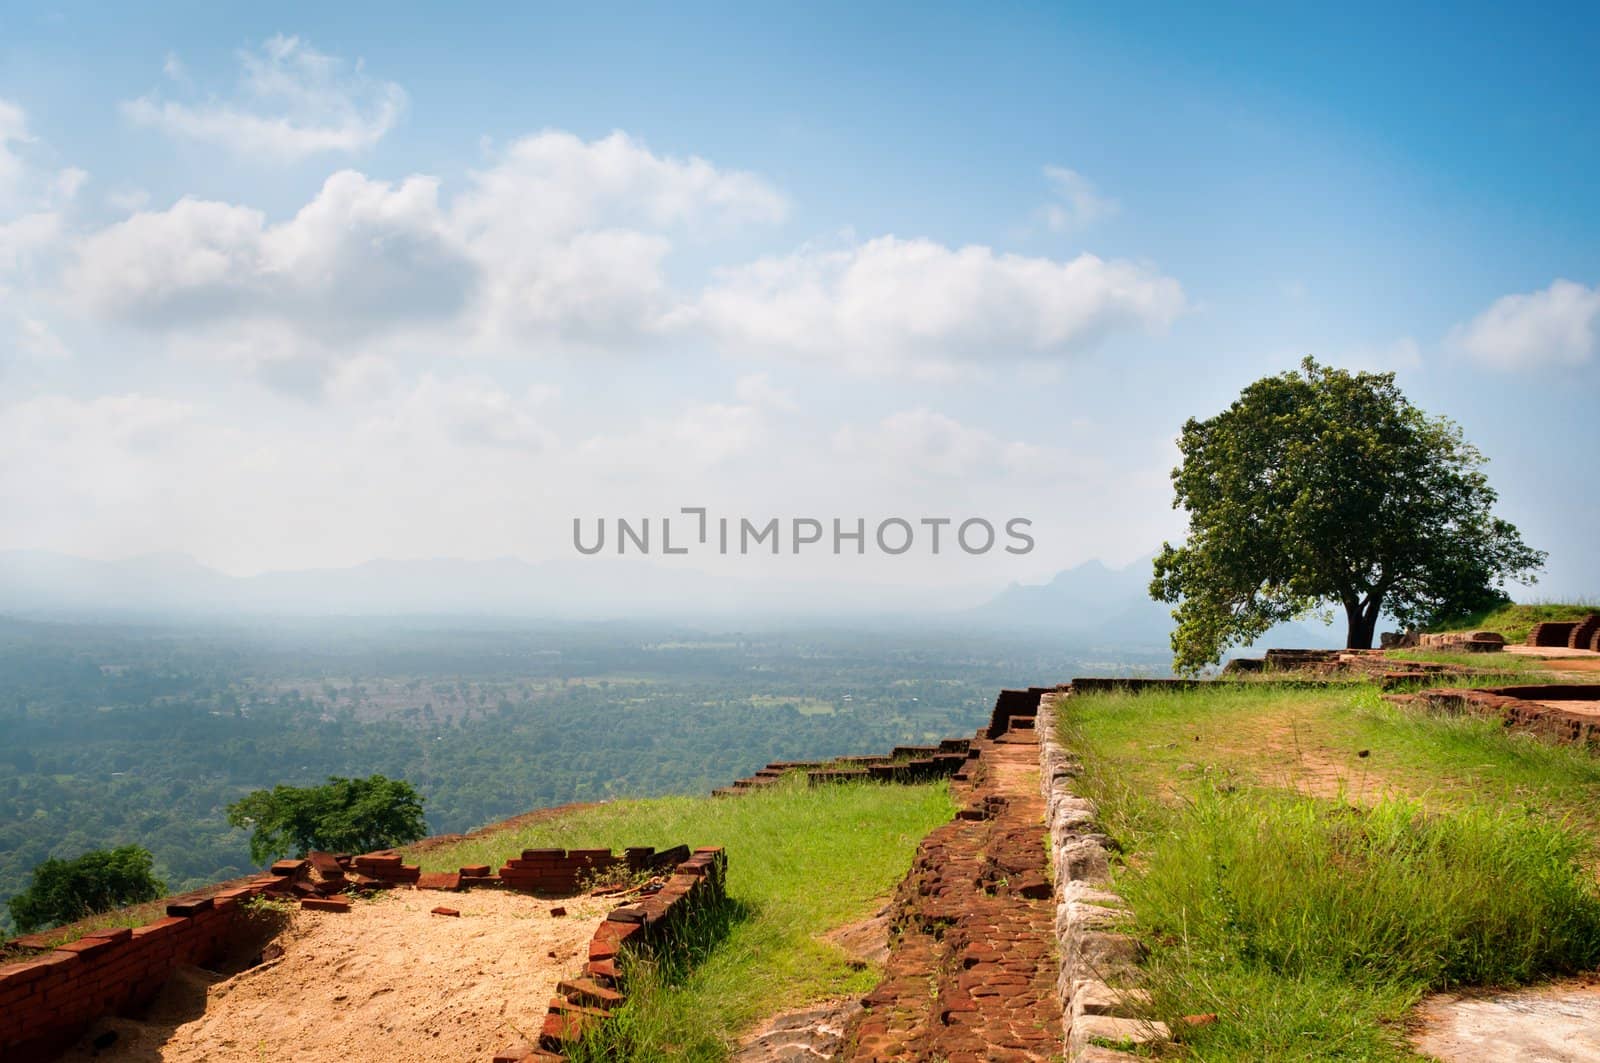 Part of the ruins of the palace and fortress of Sigiriya, Cultural Triangle, Sri Lanka